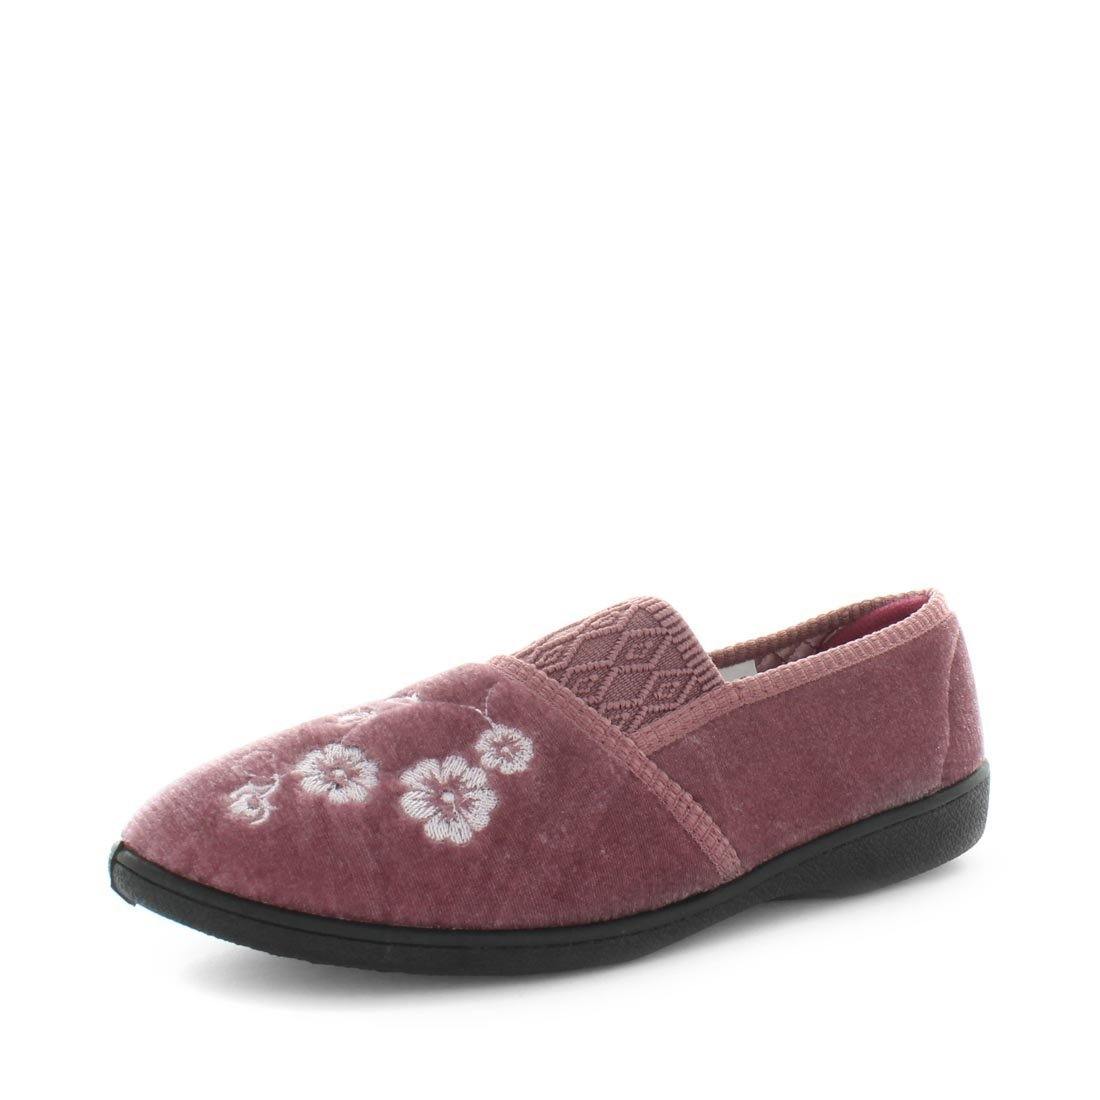 Load image into Gallery viewer, Elsah 3 by panda slippers - comfort steady womens slippers with floral printed deigned upper. comfort footbed and steady sole - womens slippers - indoor slippers - outdoor slippers - panda slippers
